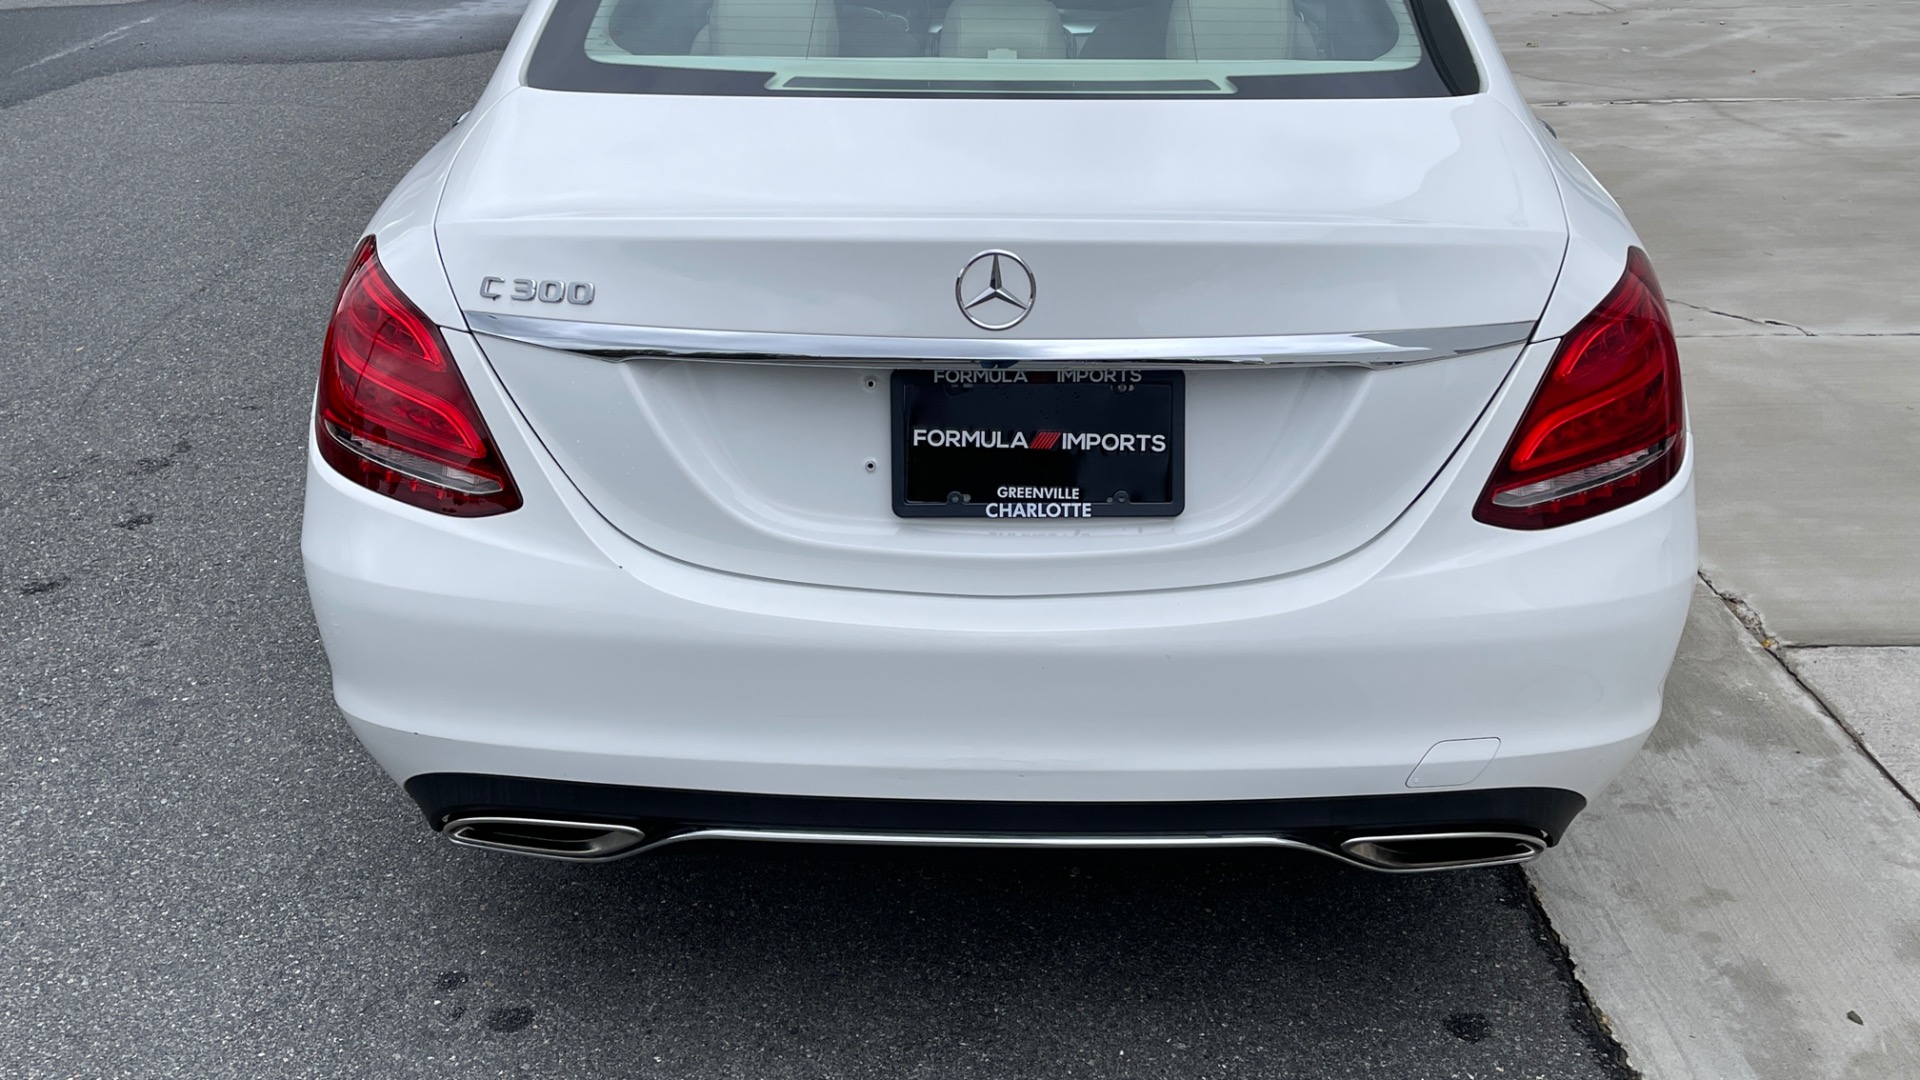 Used 2018 Mercedes-Benz C-Class C 300 / PREMIUM PACKAGE / 18IN WHEELS / HEATED FRONT SEATS / LED HEADLIGHTS for sale Sold at Formula Imports in Charlotte NC 28227 8